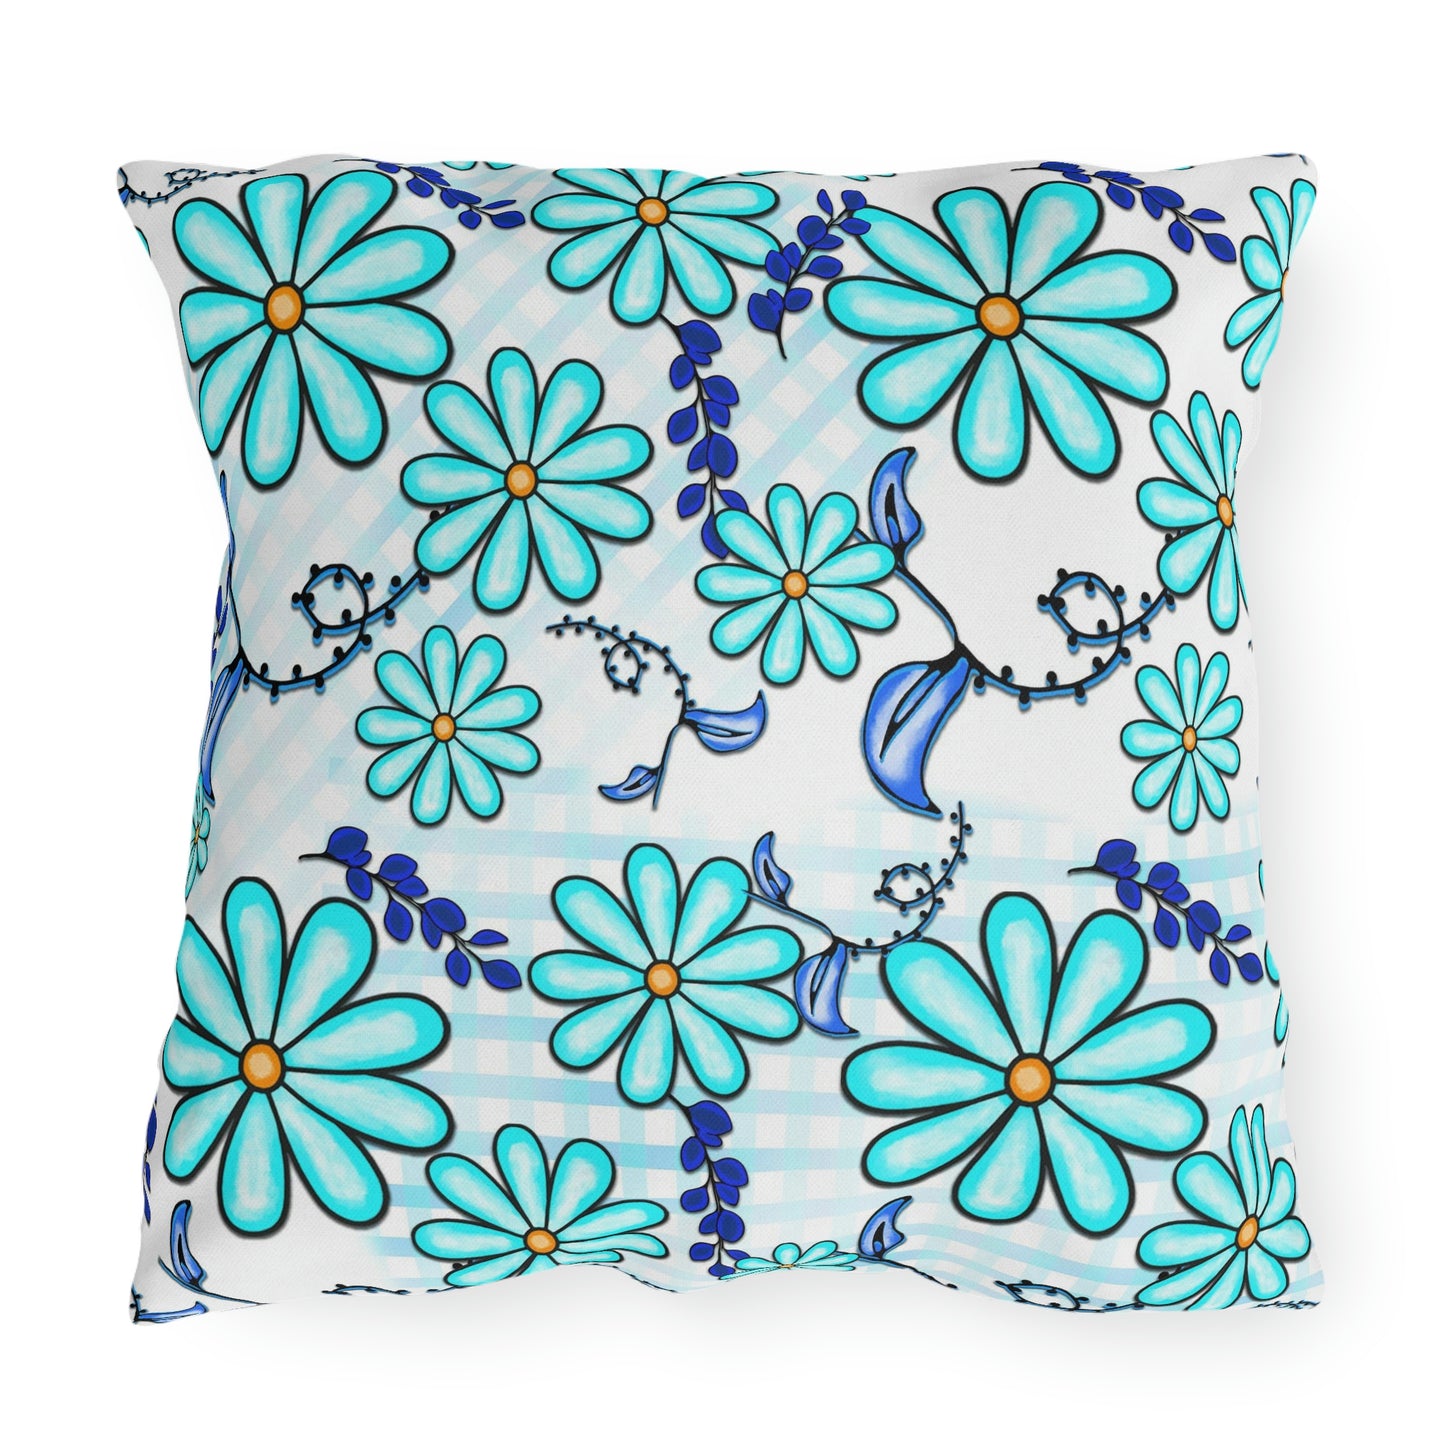 Blue Daisy, Grace Upon Grace Outdoor Pillow Cover AND Form, Outdoor Living, Fire Pit & Porch Swing Friendly, Blue Daisy, Home Decor